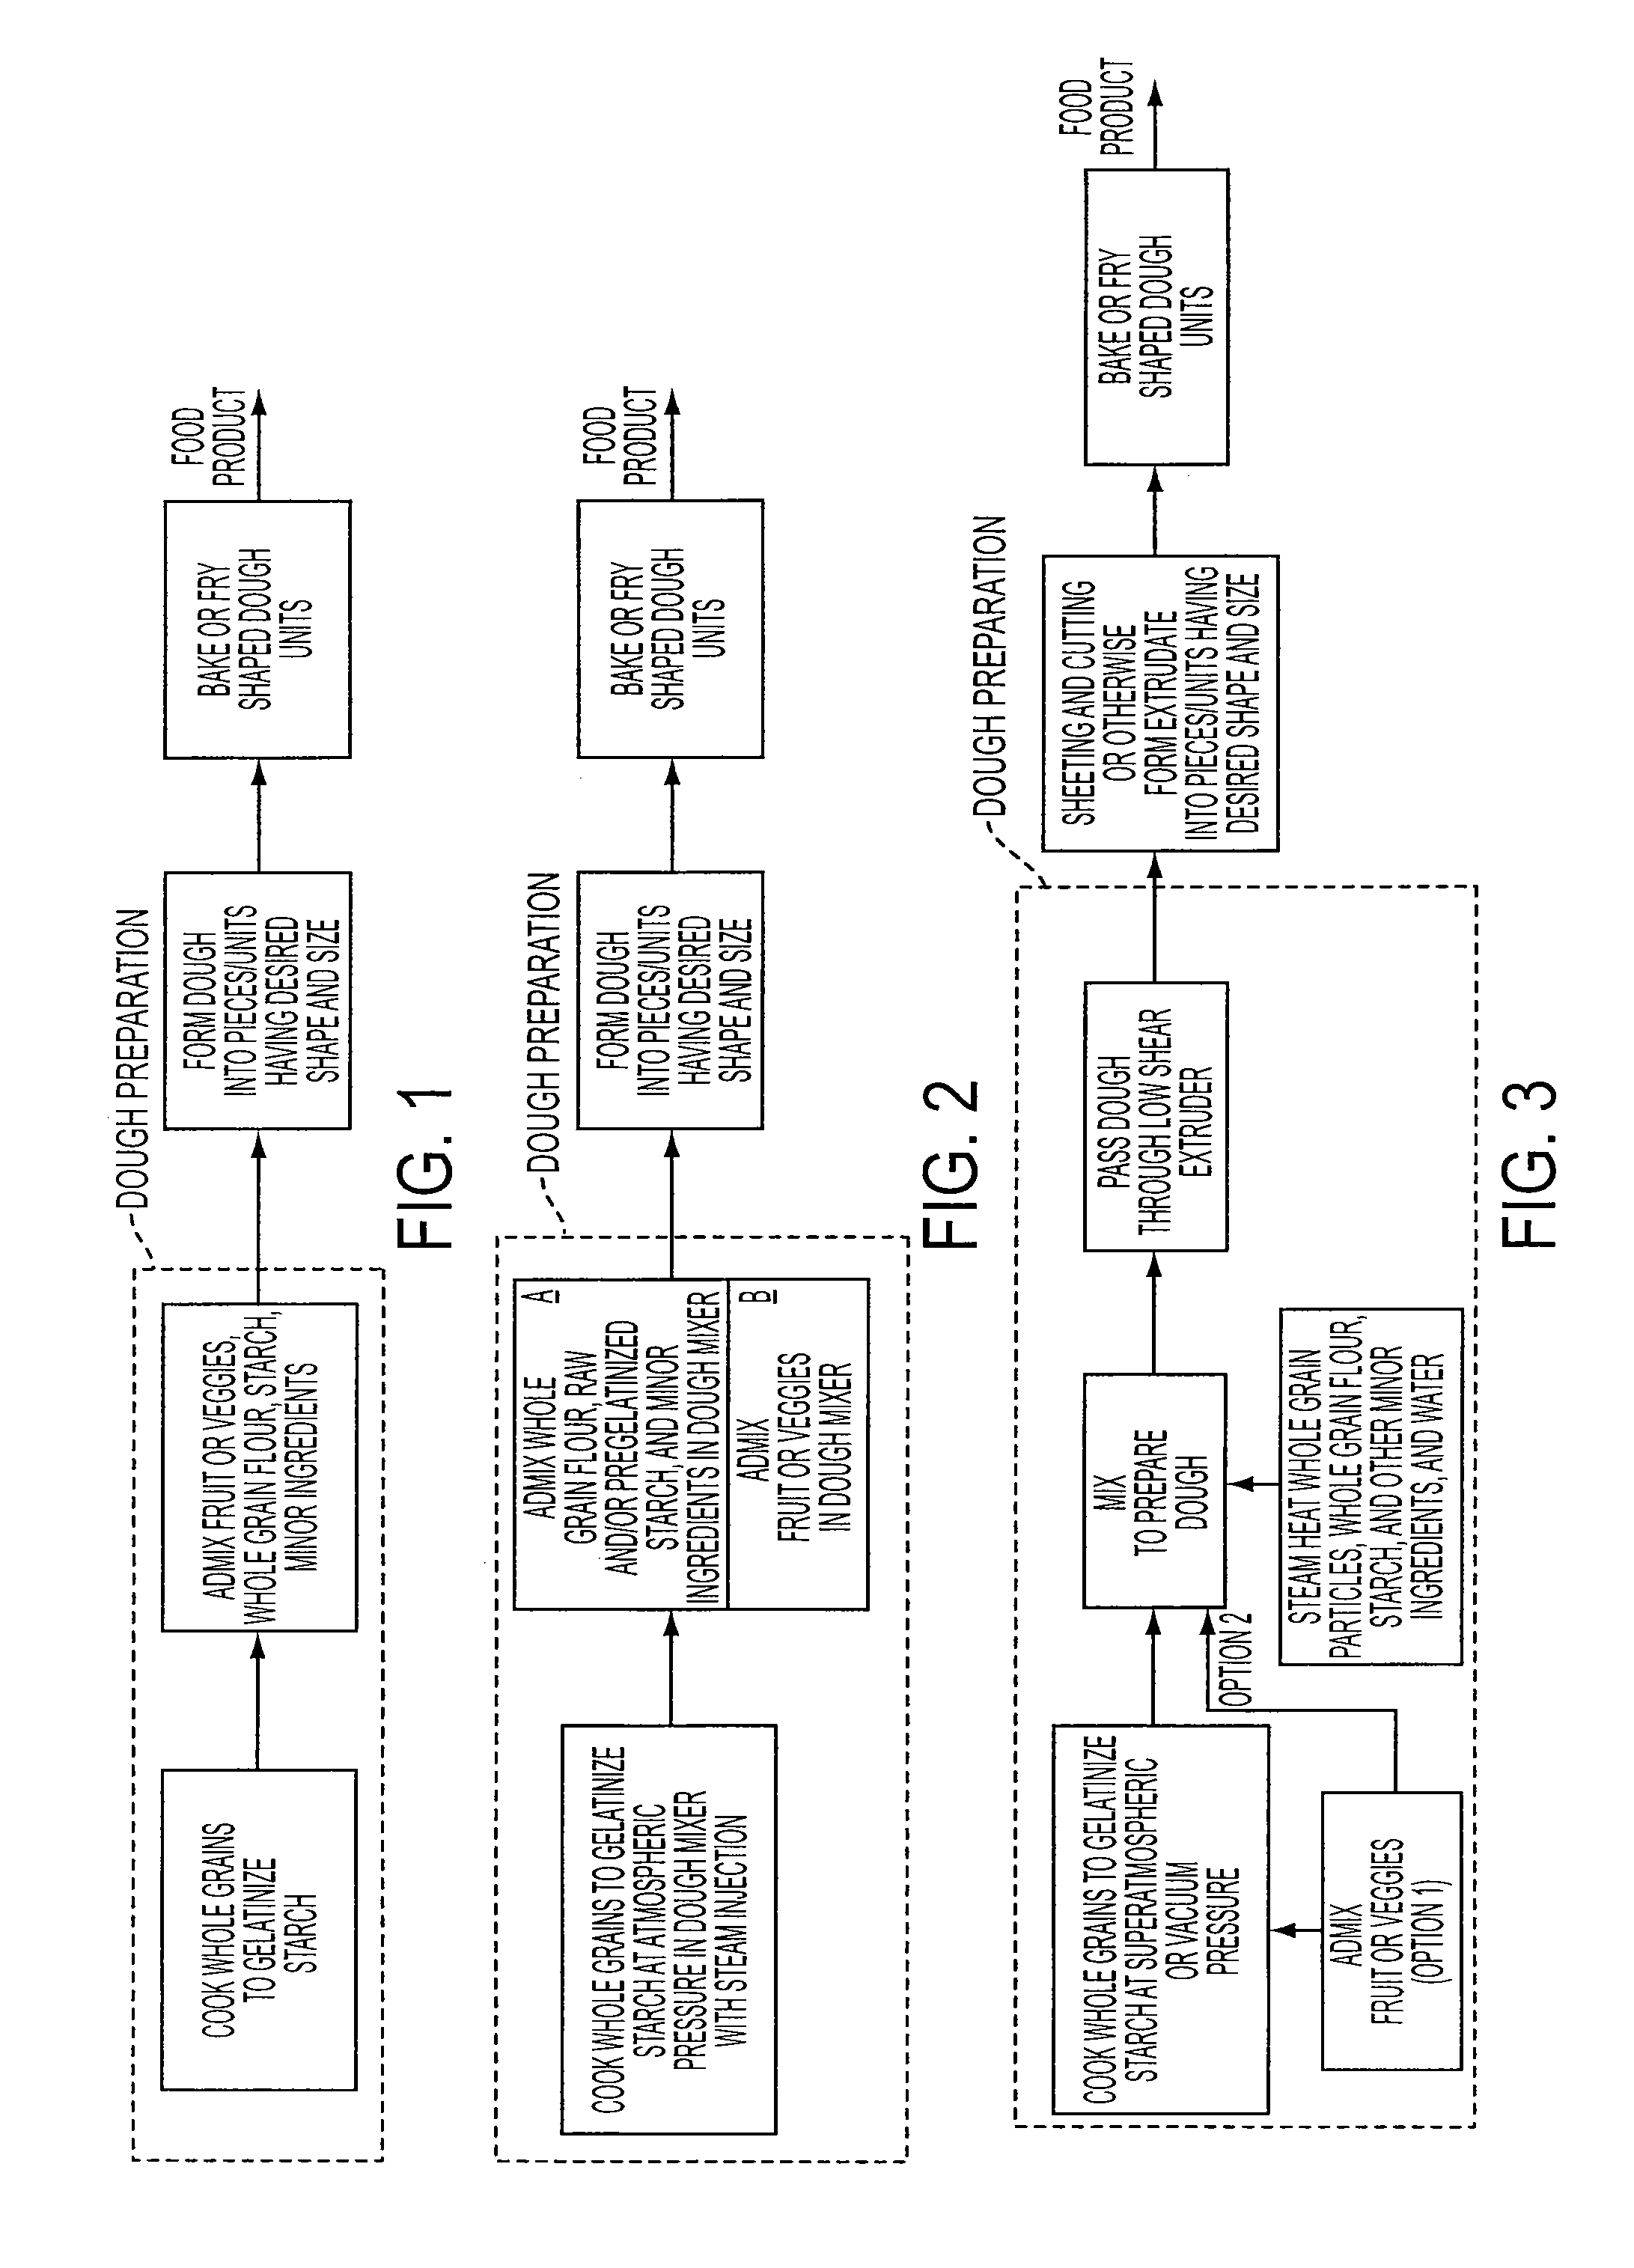 Production of whole grain-containing composite food products